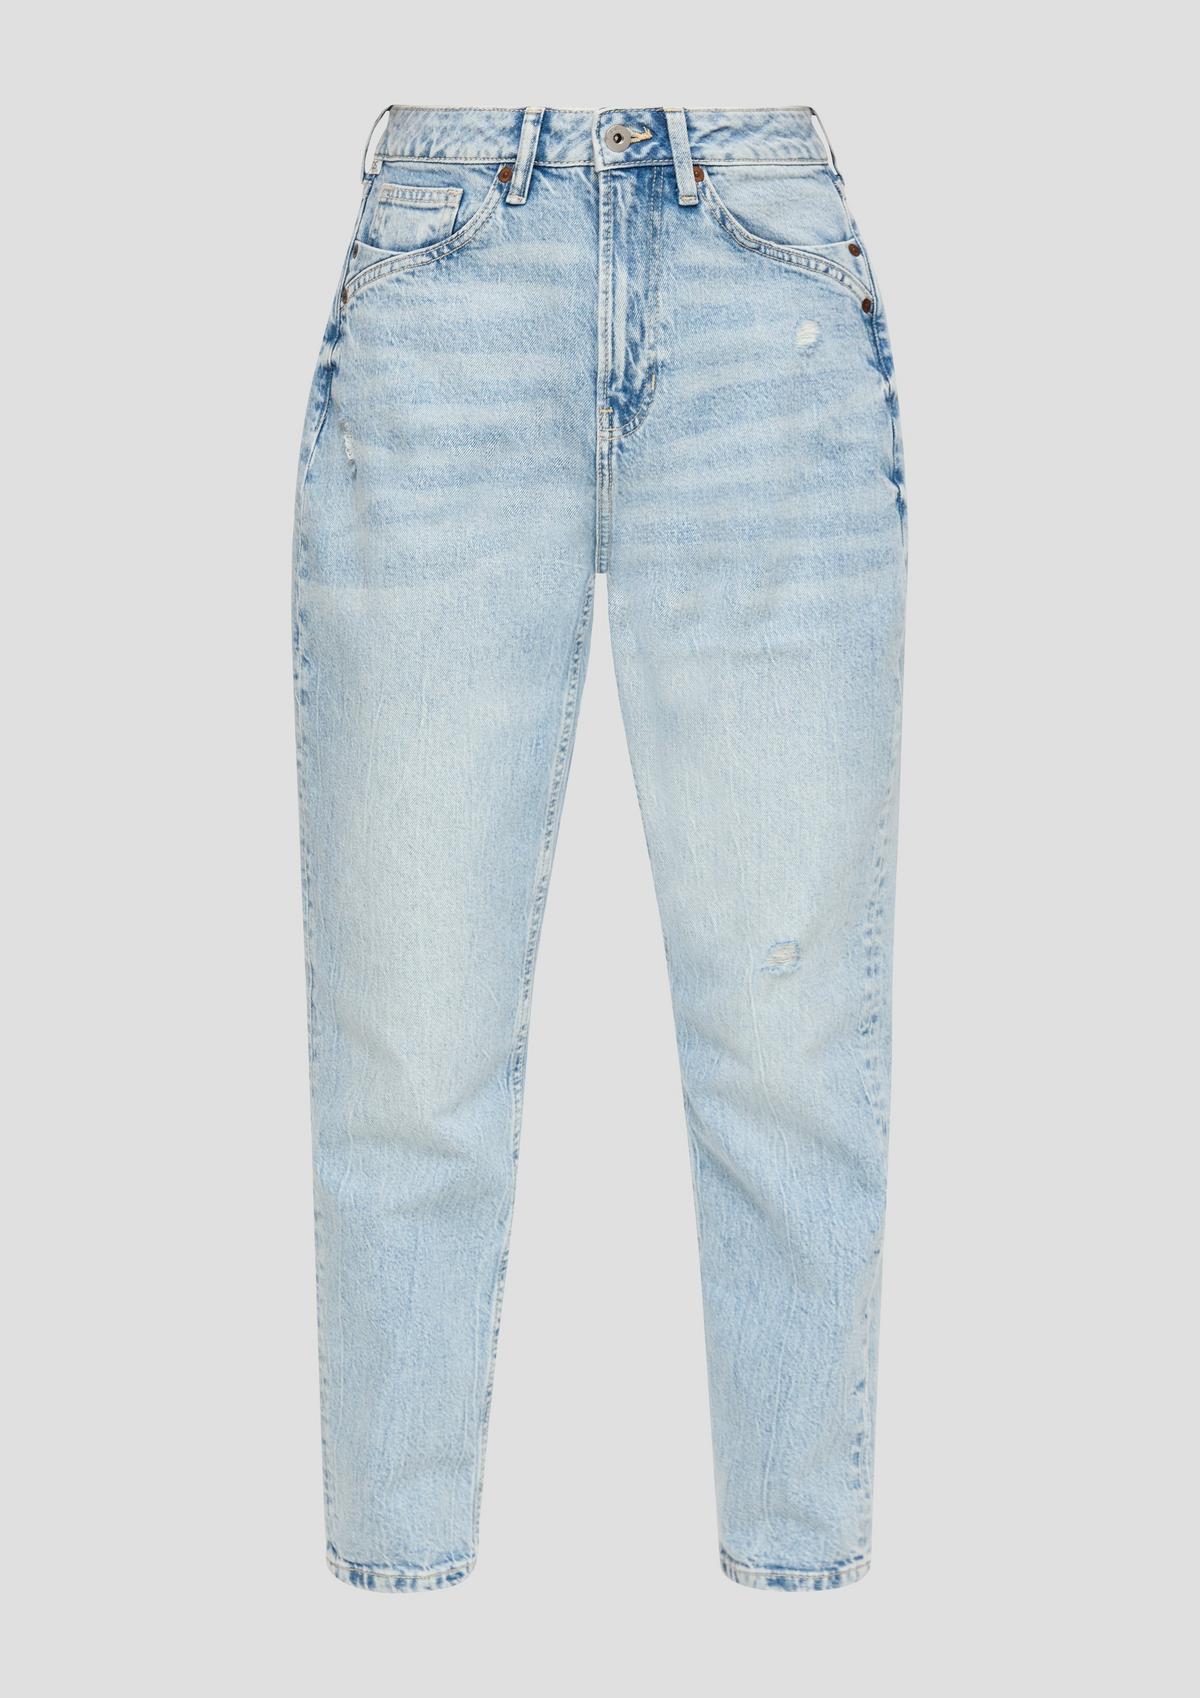 s.Oliver Ankle-Jeans Mom / Relaxed fit / High rise / Tapered leg